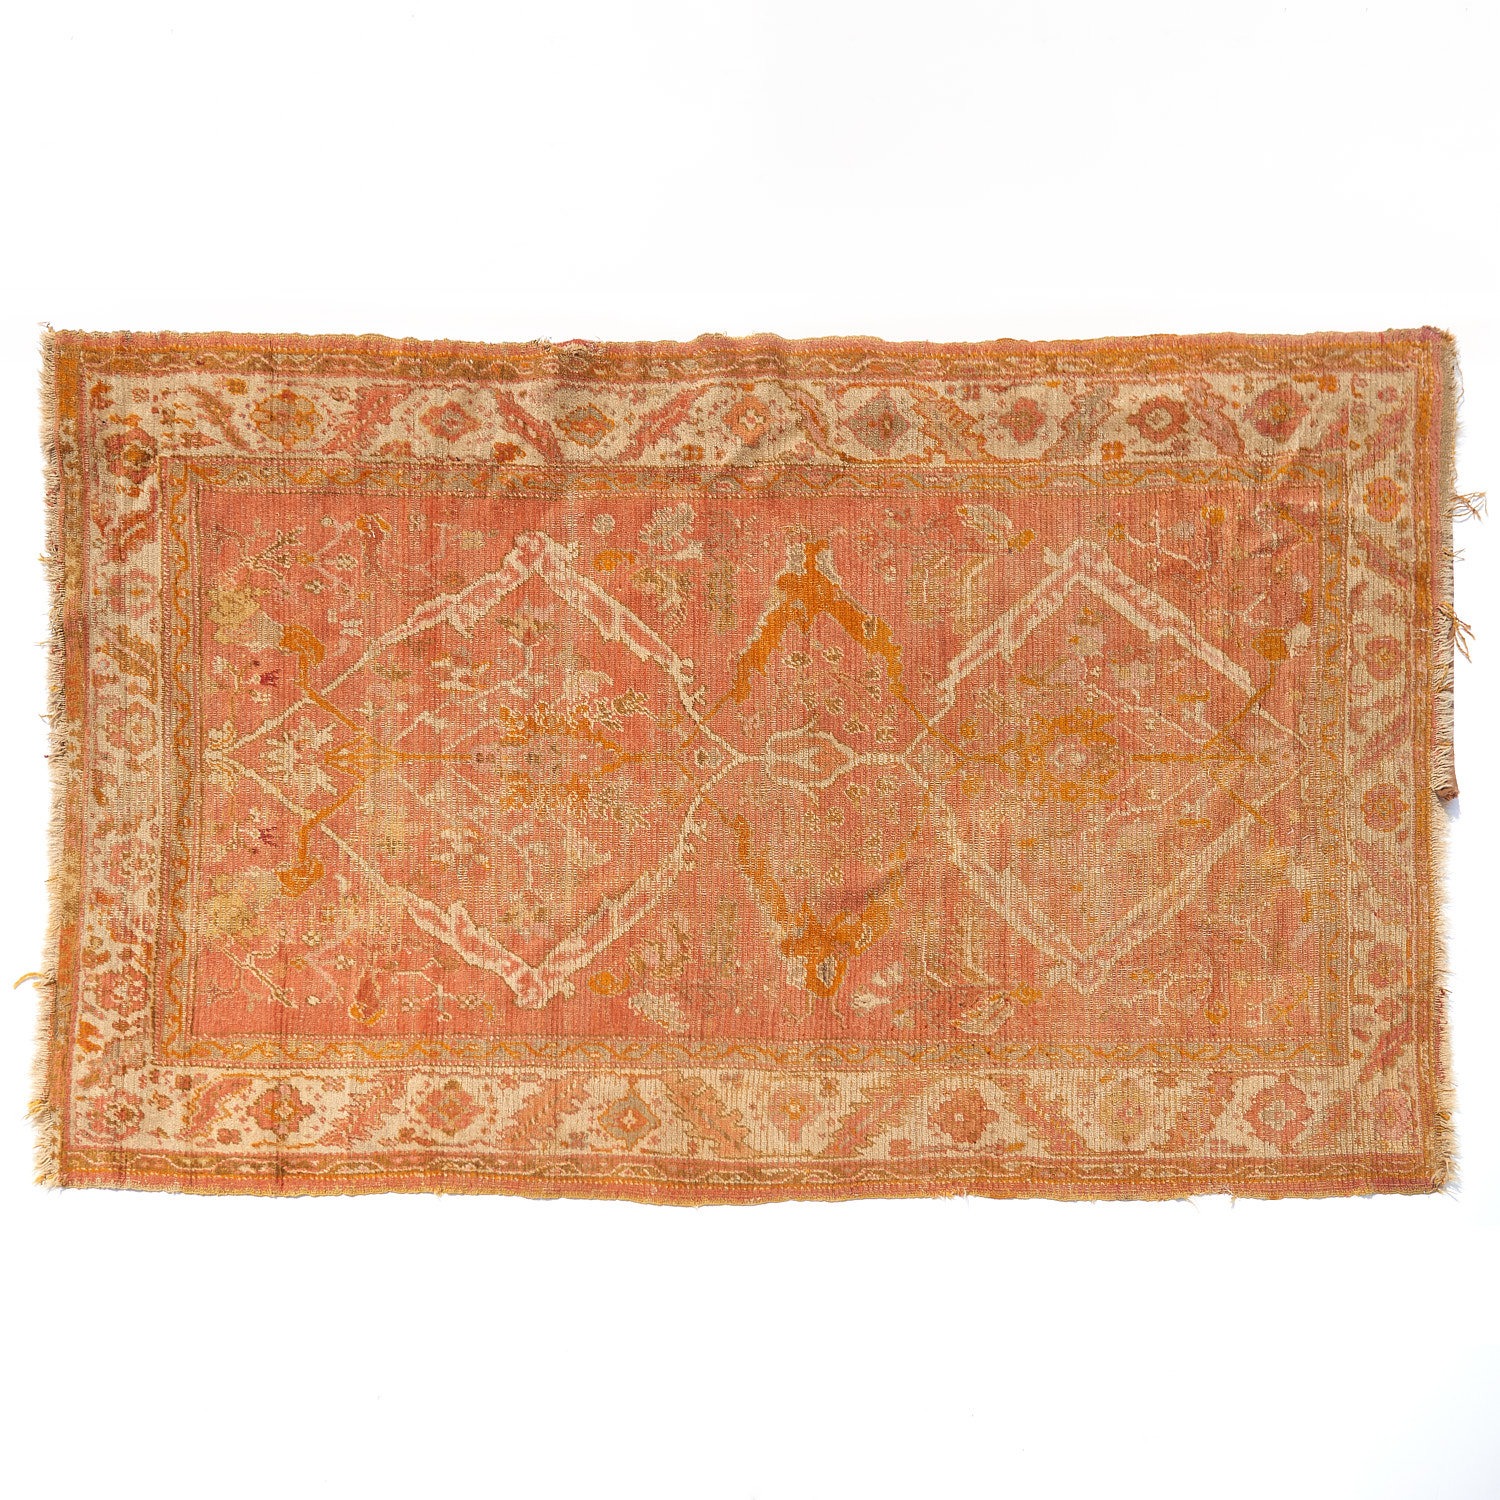 OUSHAK RUG Late 19th/20th c., typical